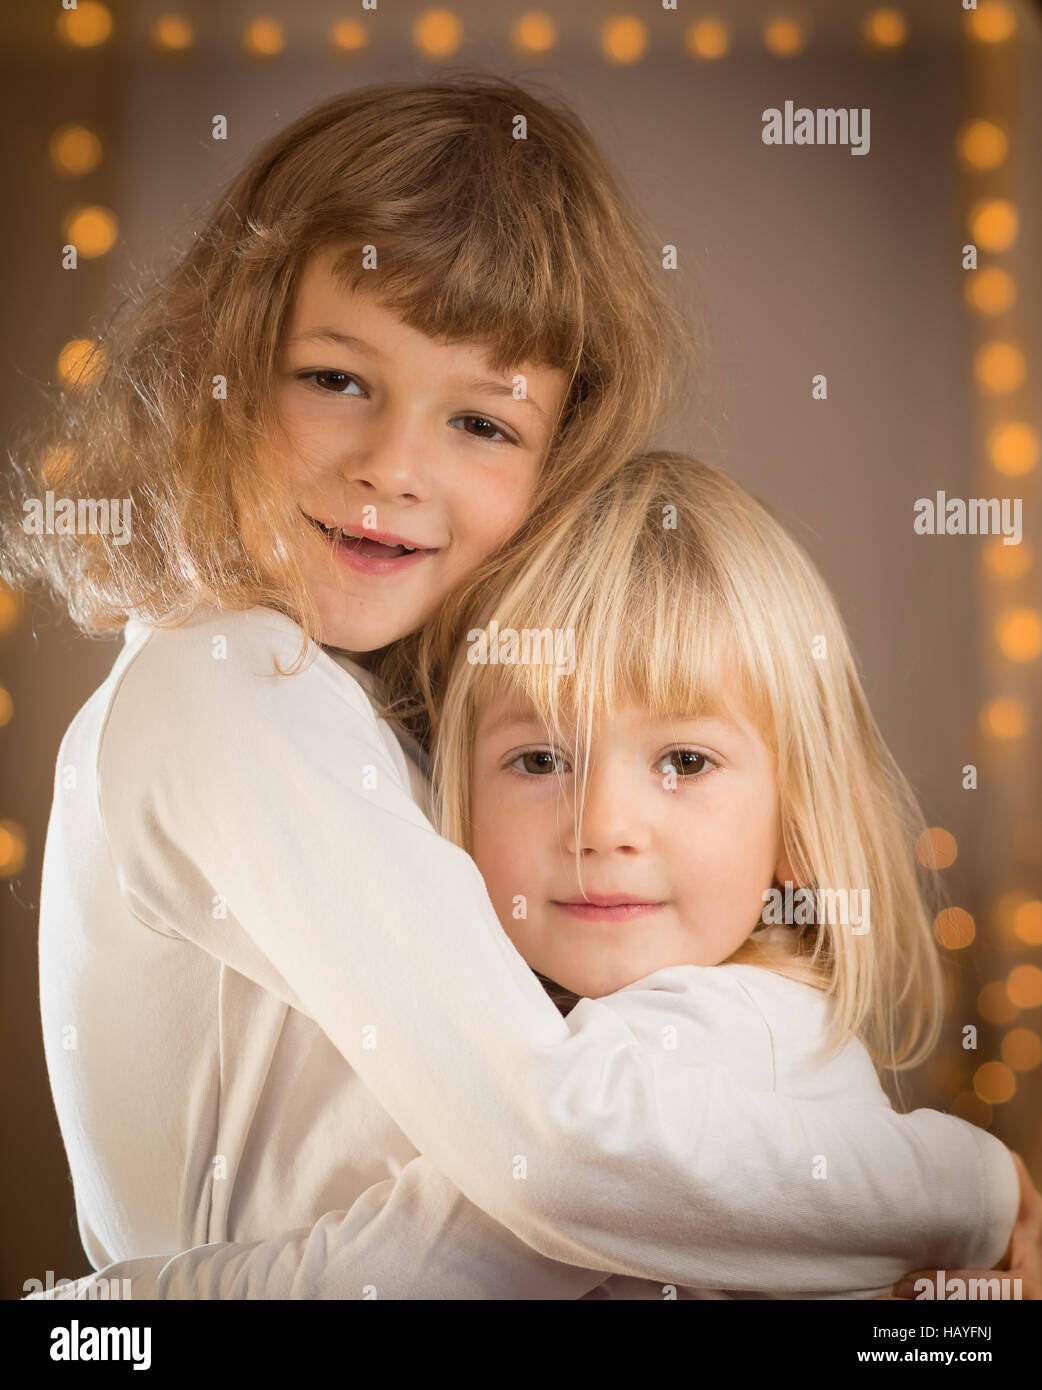 Two girls hugging each other Stock Photo